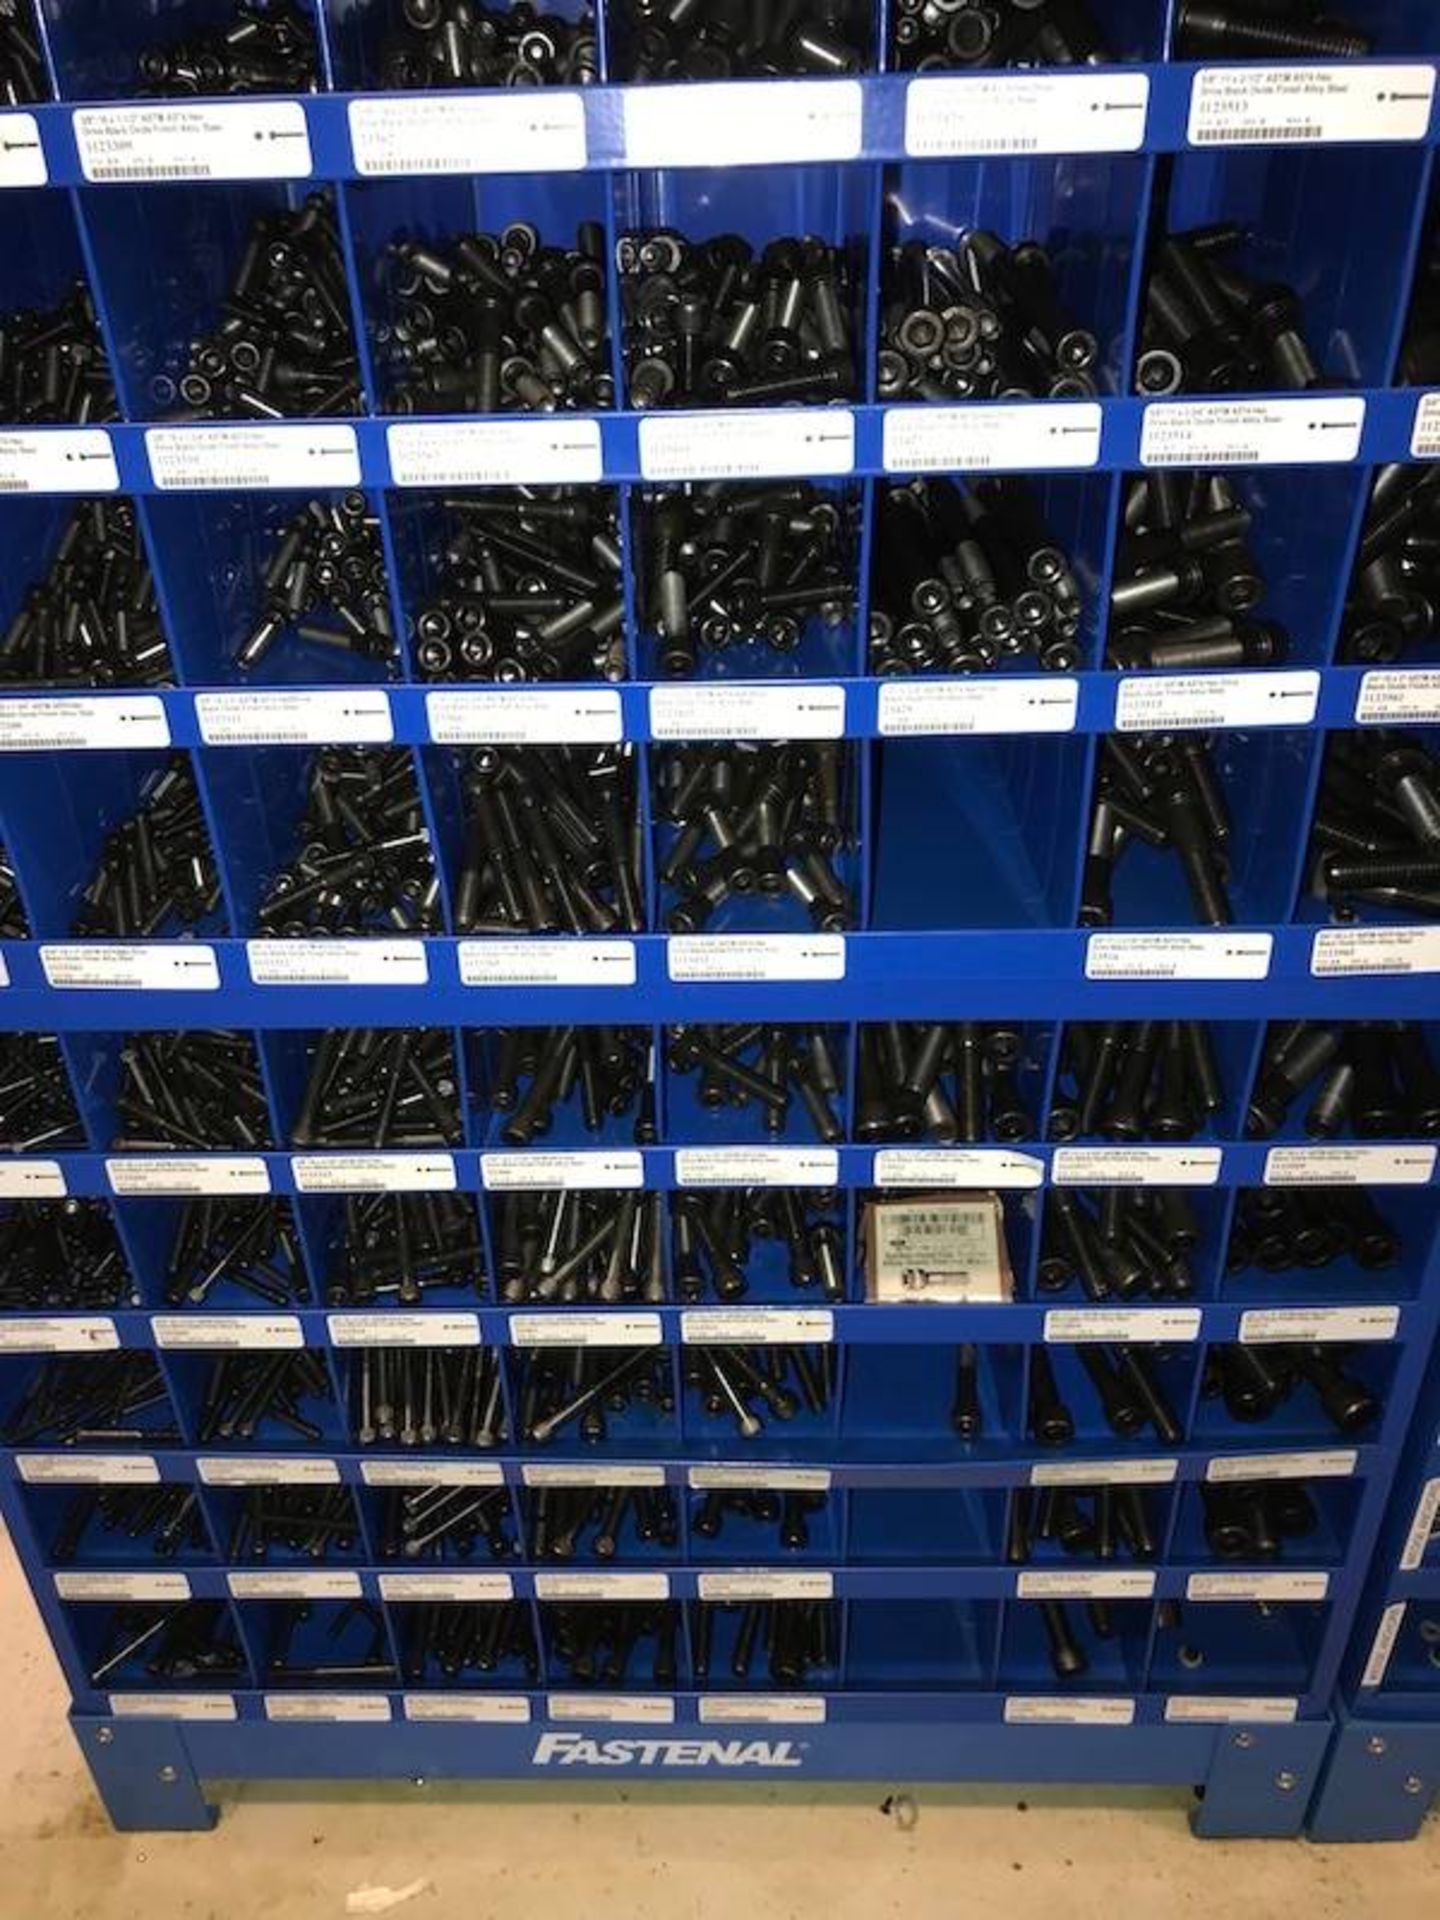 Contents of Fastenal Parts Bins - Image 64 of 70